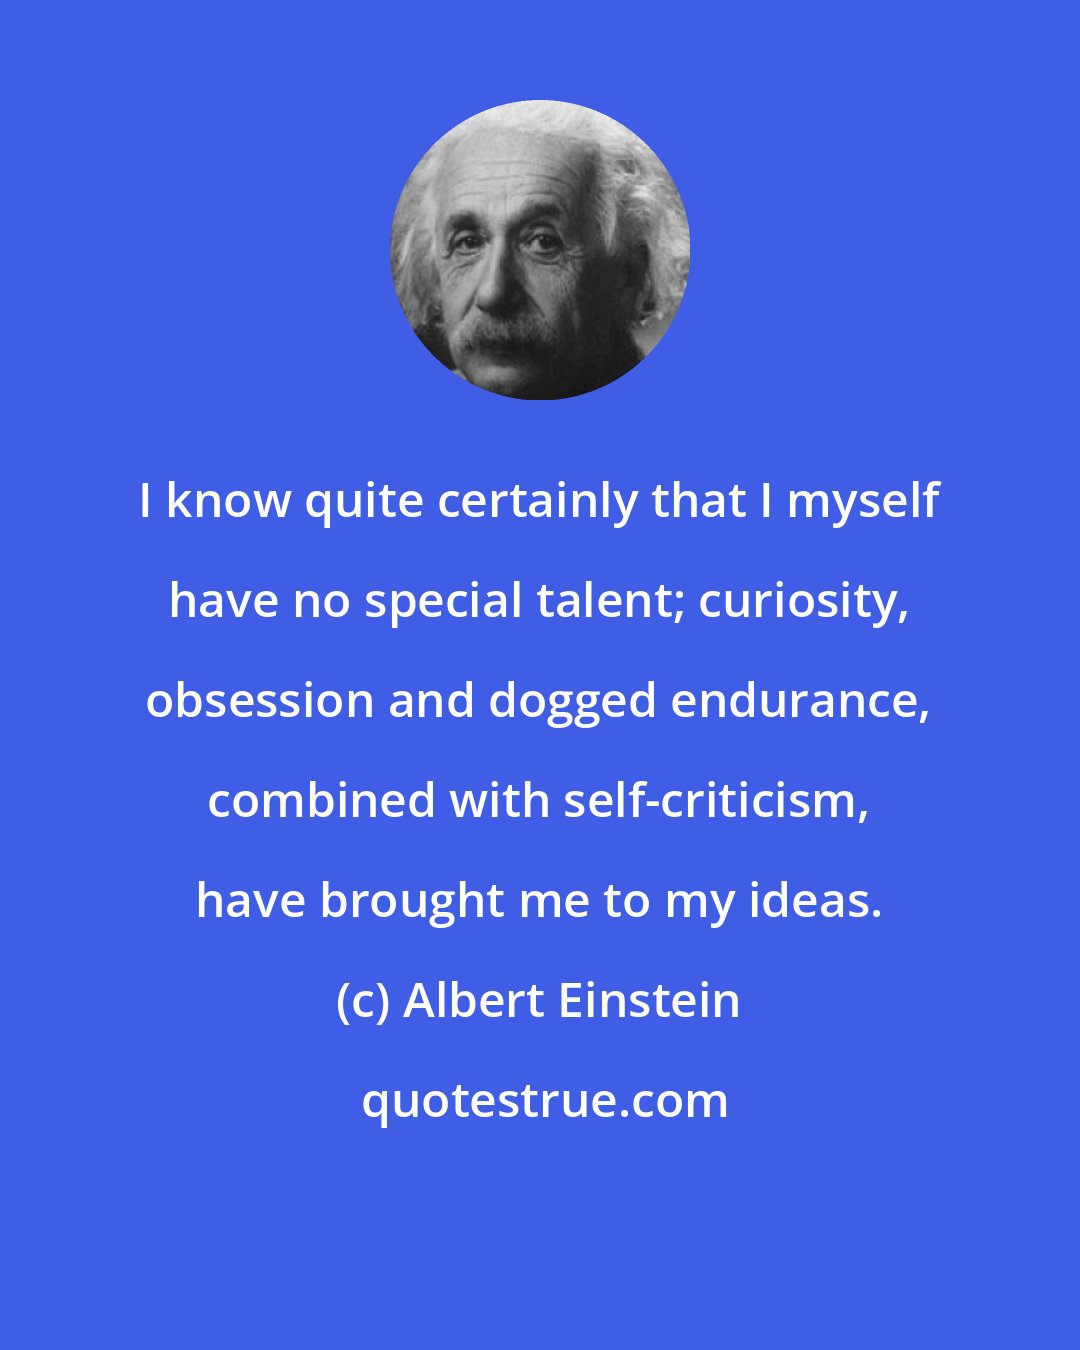 Albert Einstein: I know quite certainly that I myself have no special talent; curiosity, obsession and dogged endurance, combined with self-criticism, have brought me to my ideas.